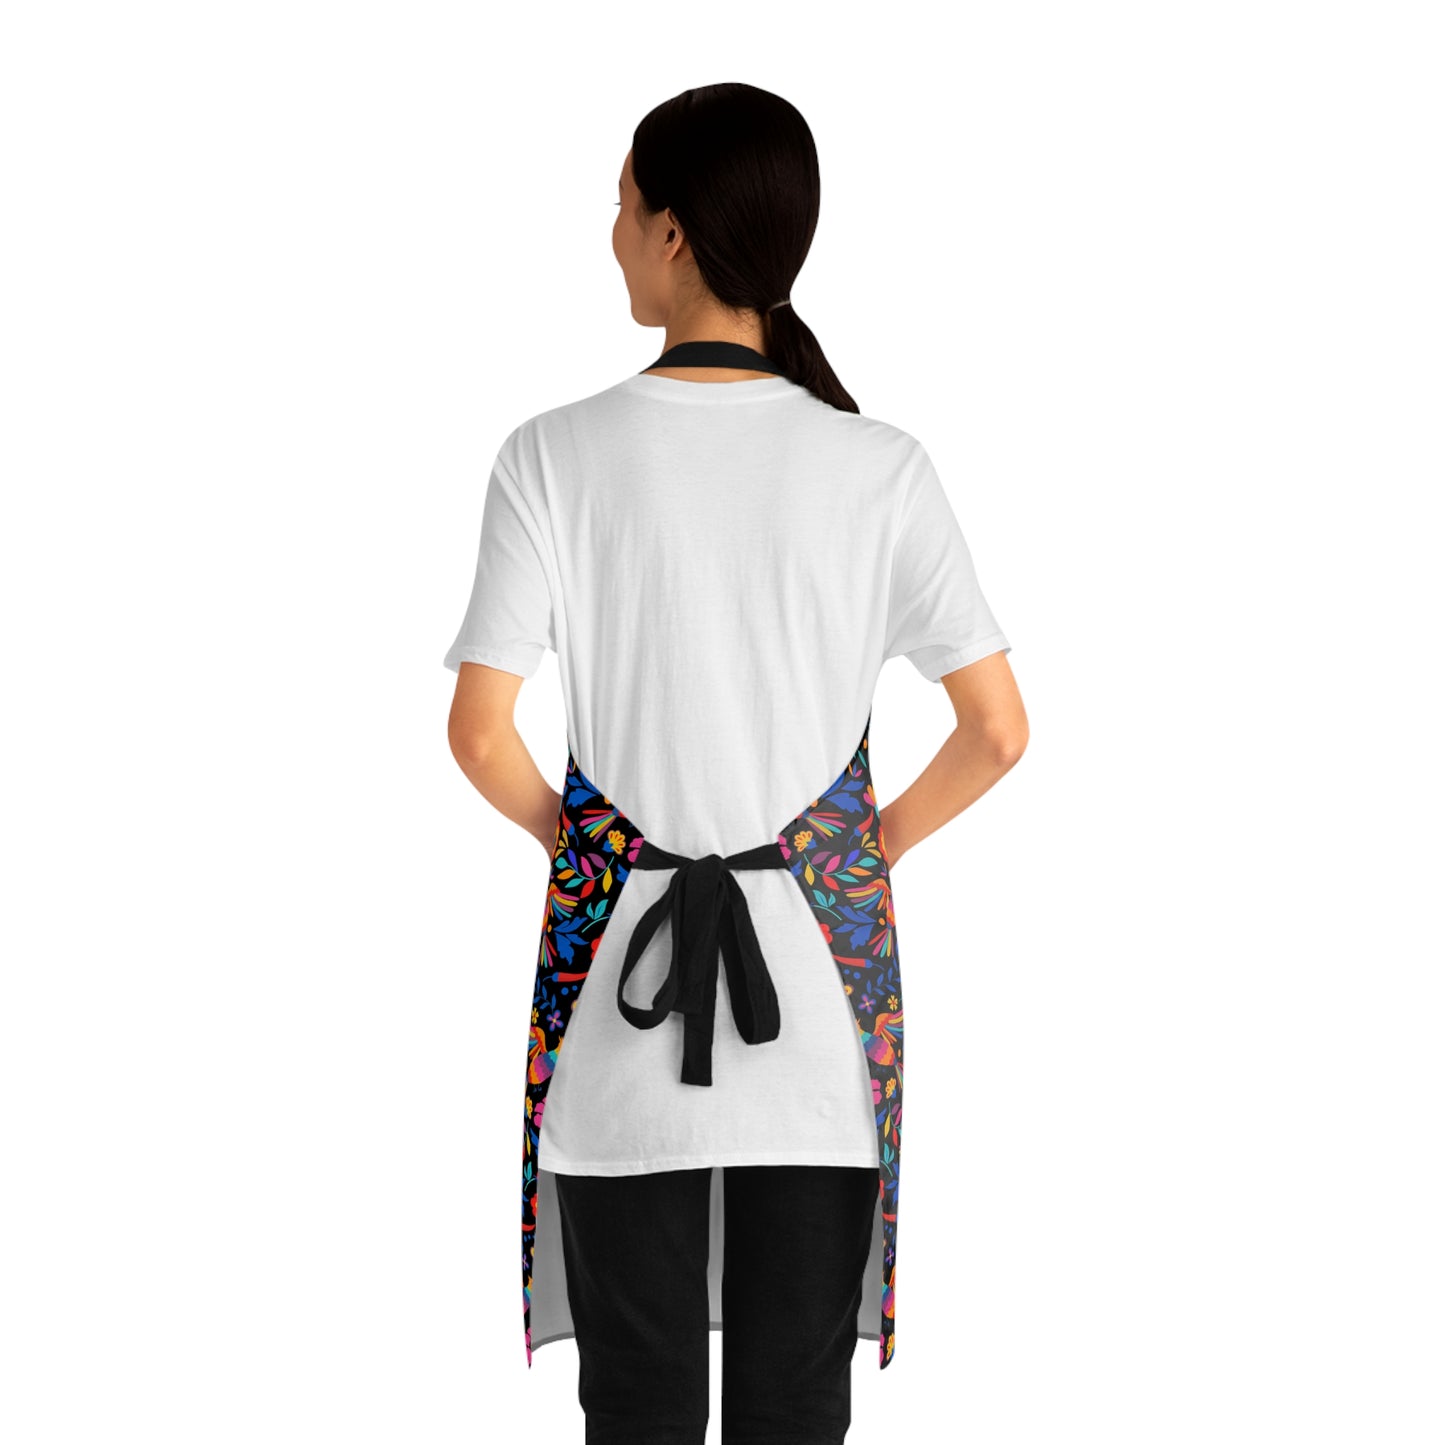 Otomi mandil. Otomi Apron for Mexican mom or Mexican dad. Mothers Day gift for Mexican wife.